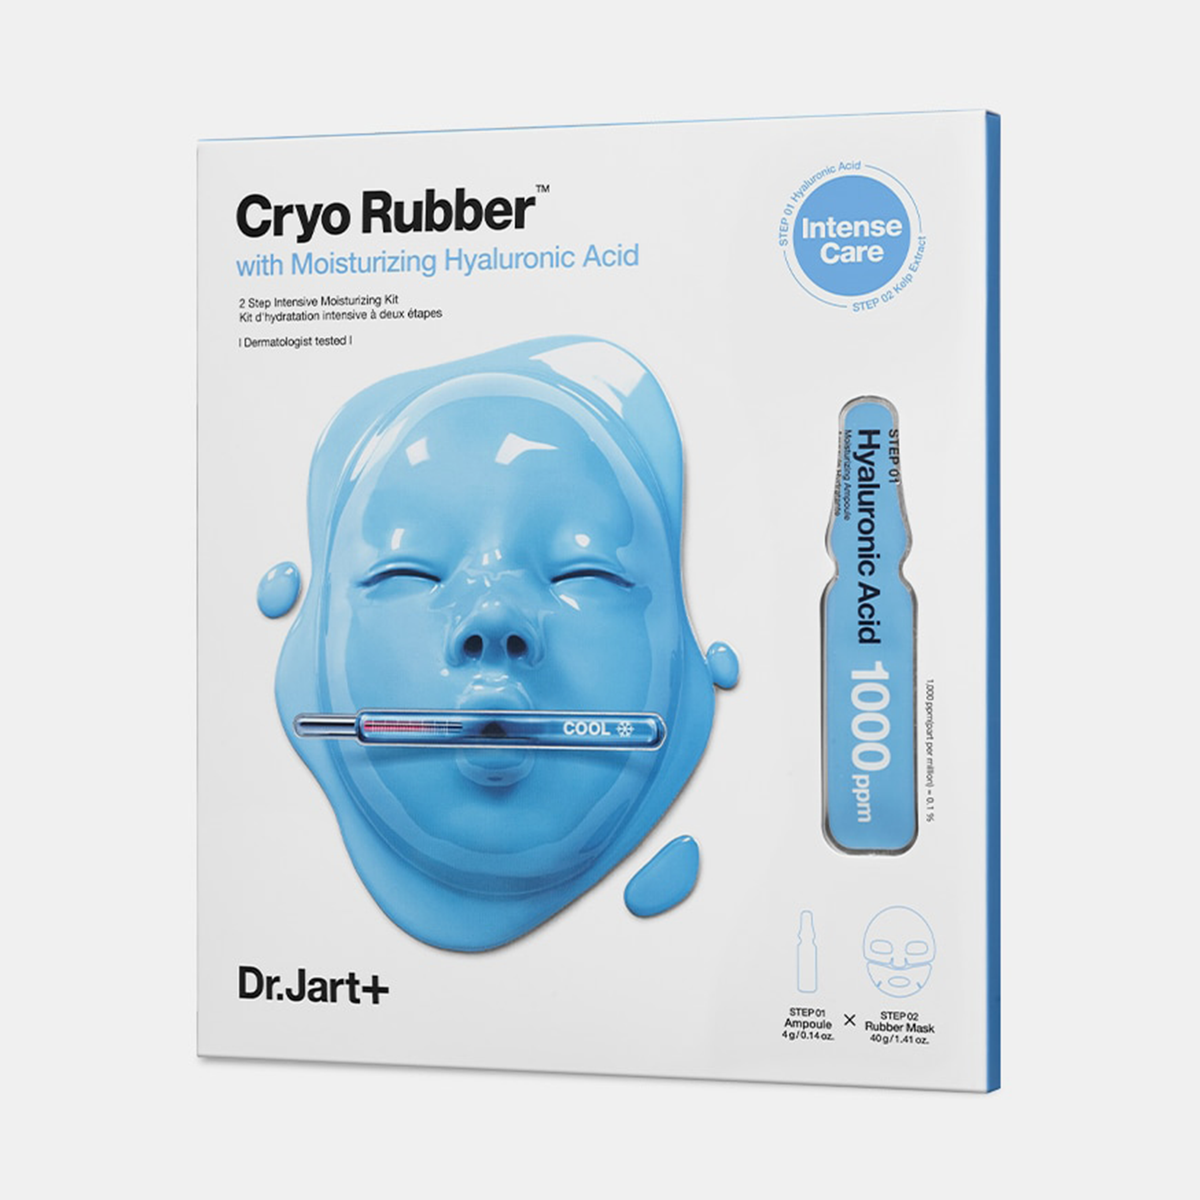 Dr.Jart+ | Cyro Rubber with Moisturizing Hyaluronic Acid